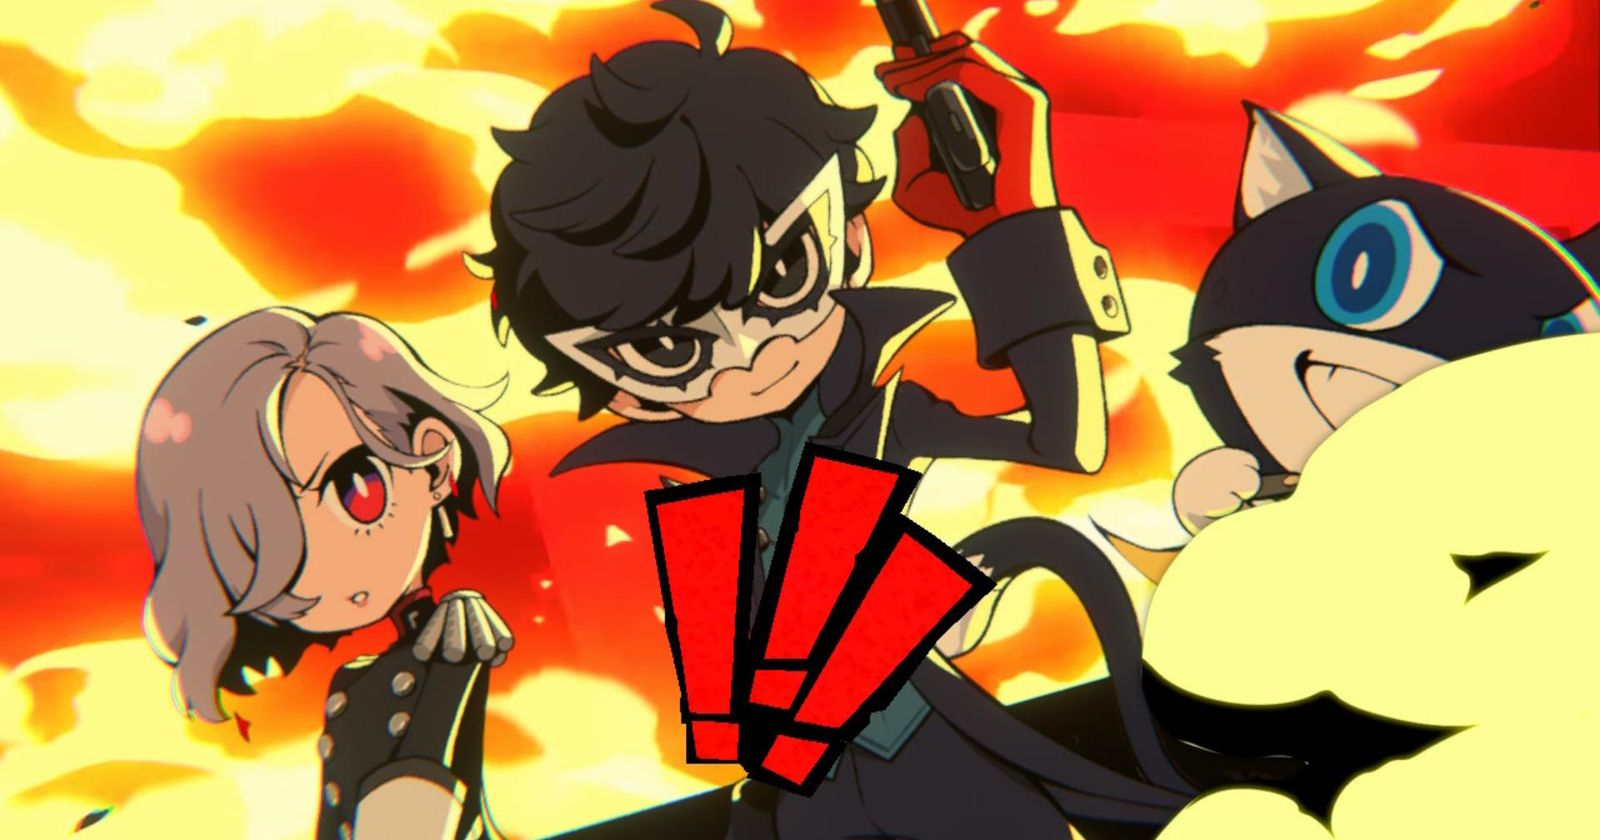 Persona 5 Tactica review - a welcoming spin-off aimed at strategy newcomers